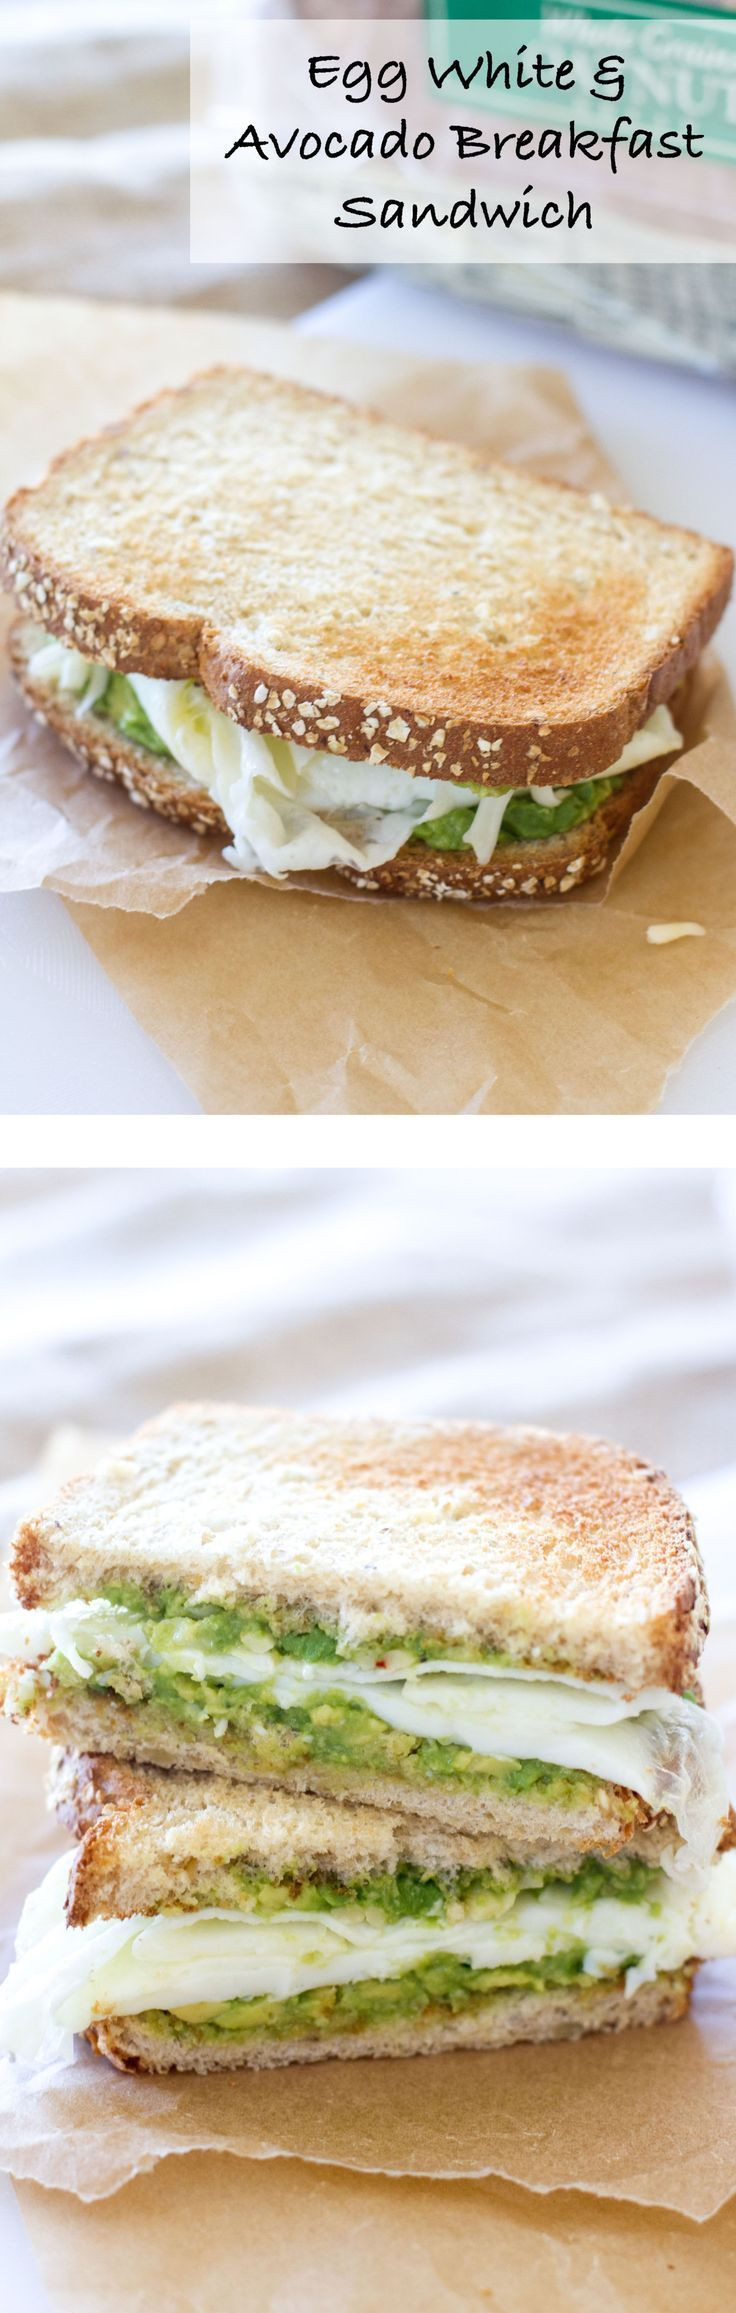 Healthy Breakfast Sandwich Ideas
 This protein packed breakfast sandwich is the perfect way